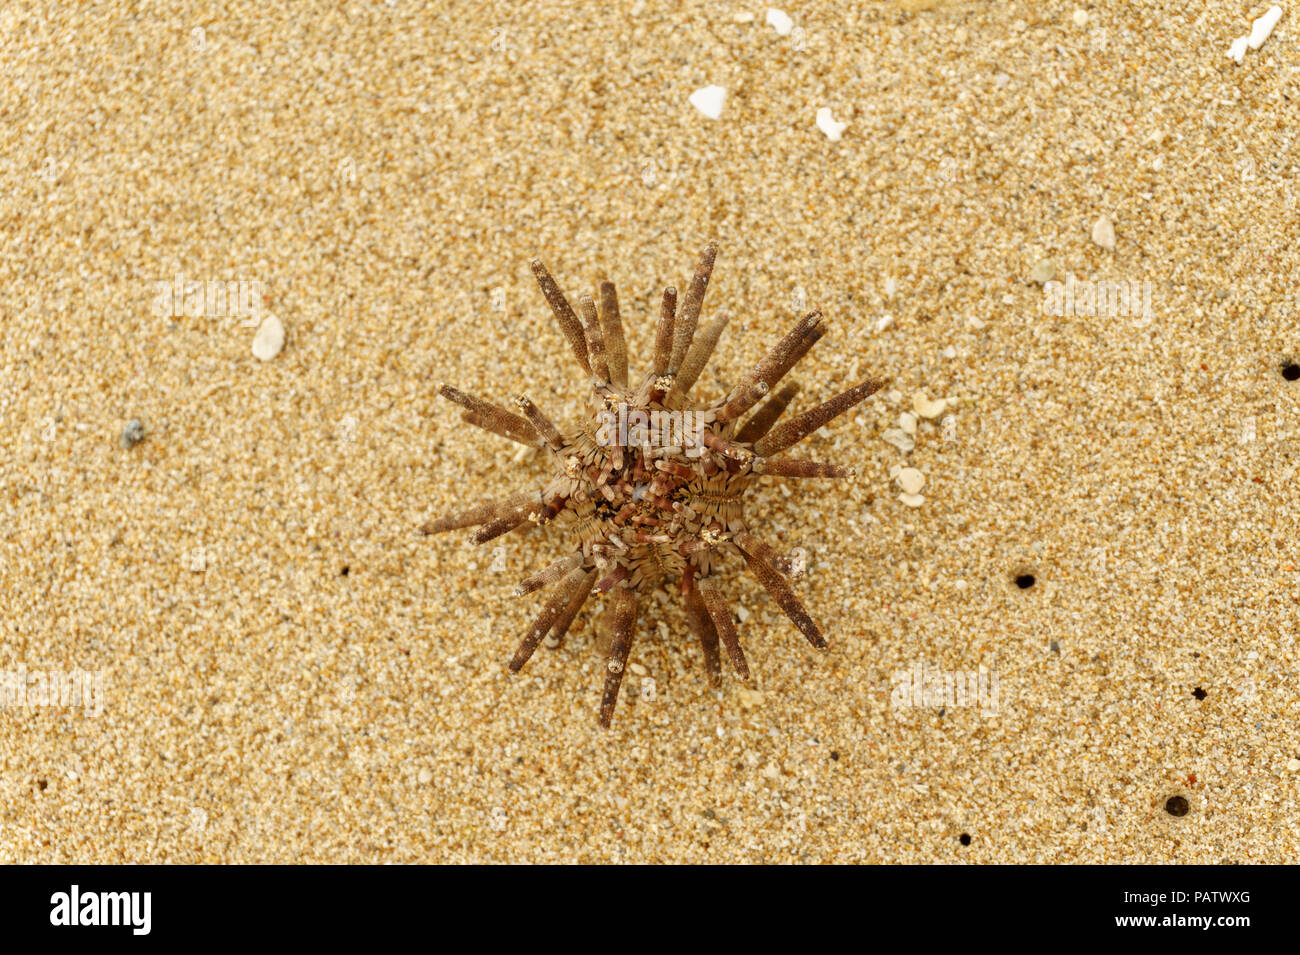 dry French Sea Urchin Specimen on the sand close-up Stock Photo